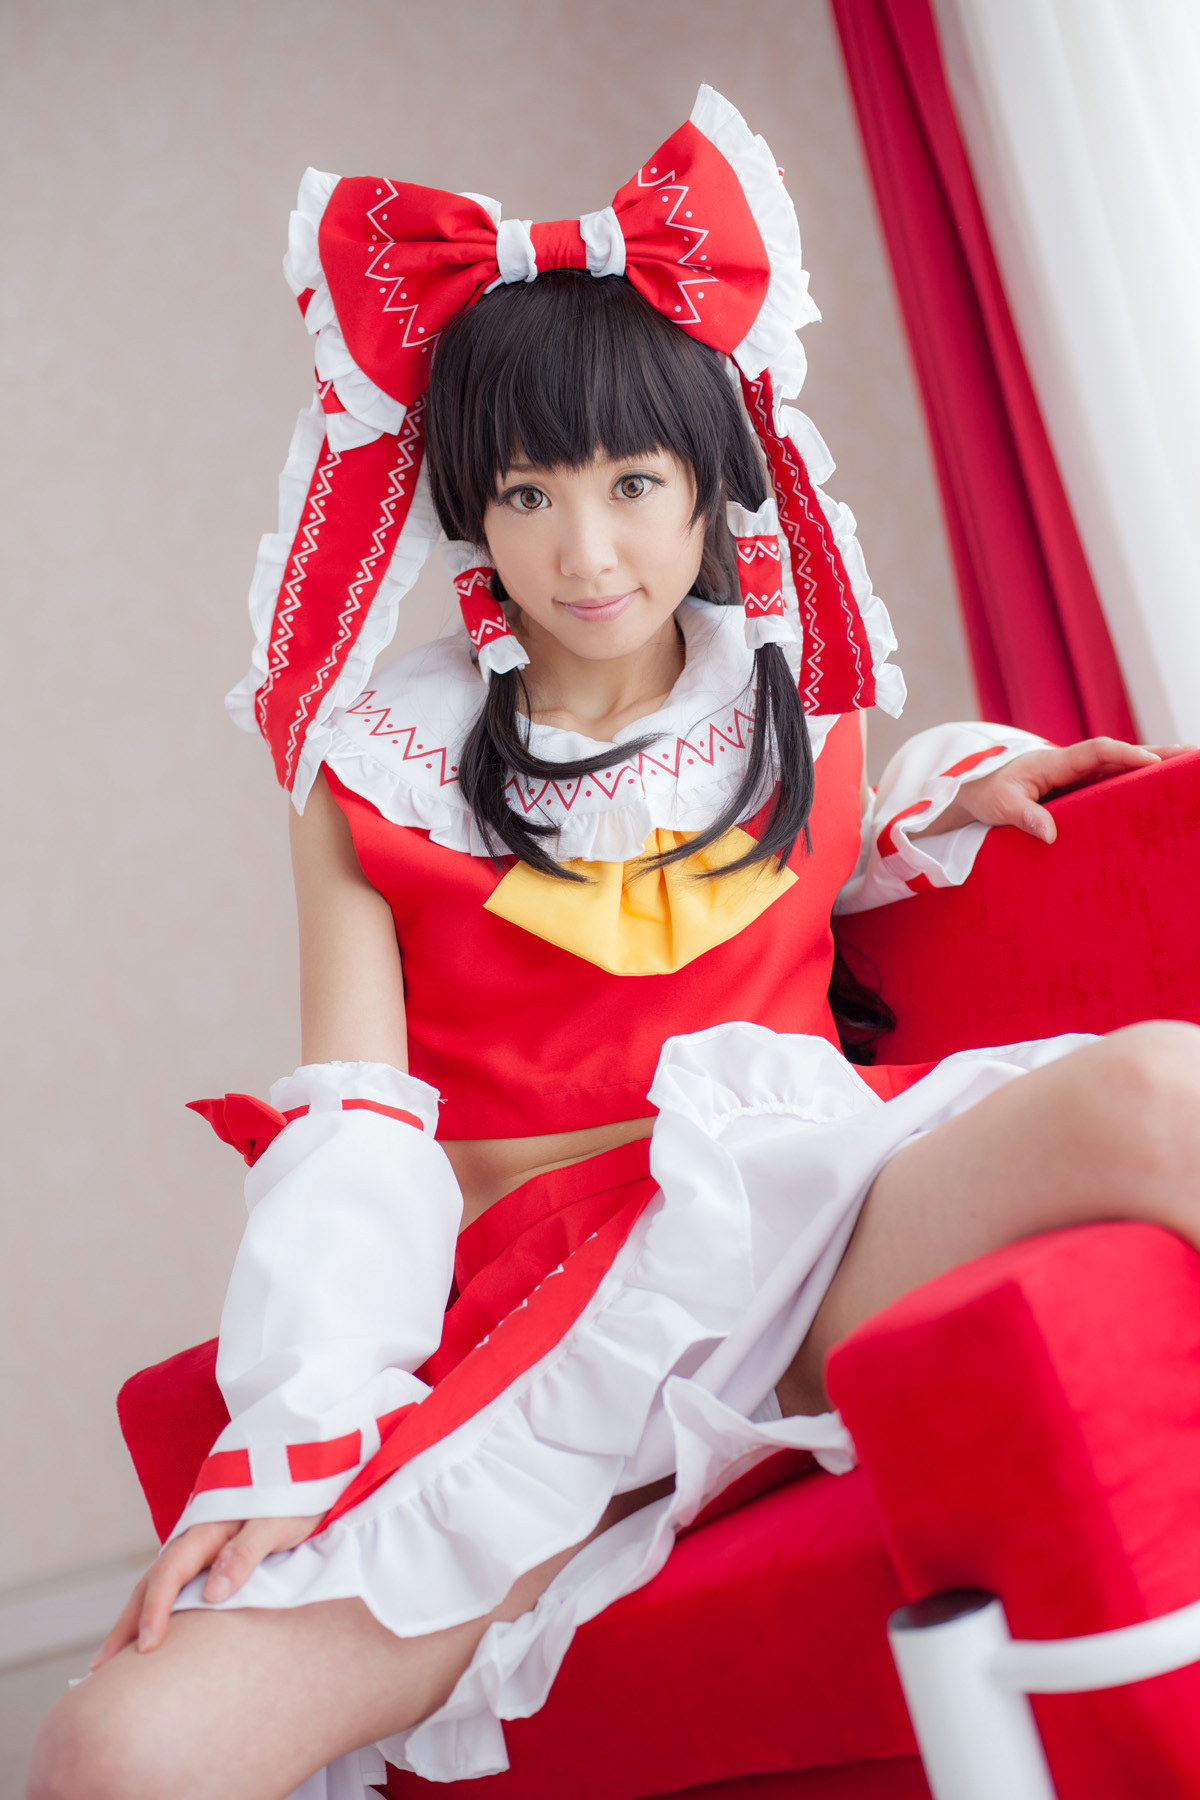 [Cosplay] 2013.12.03 Touhou Project cosplay